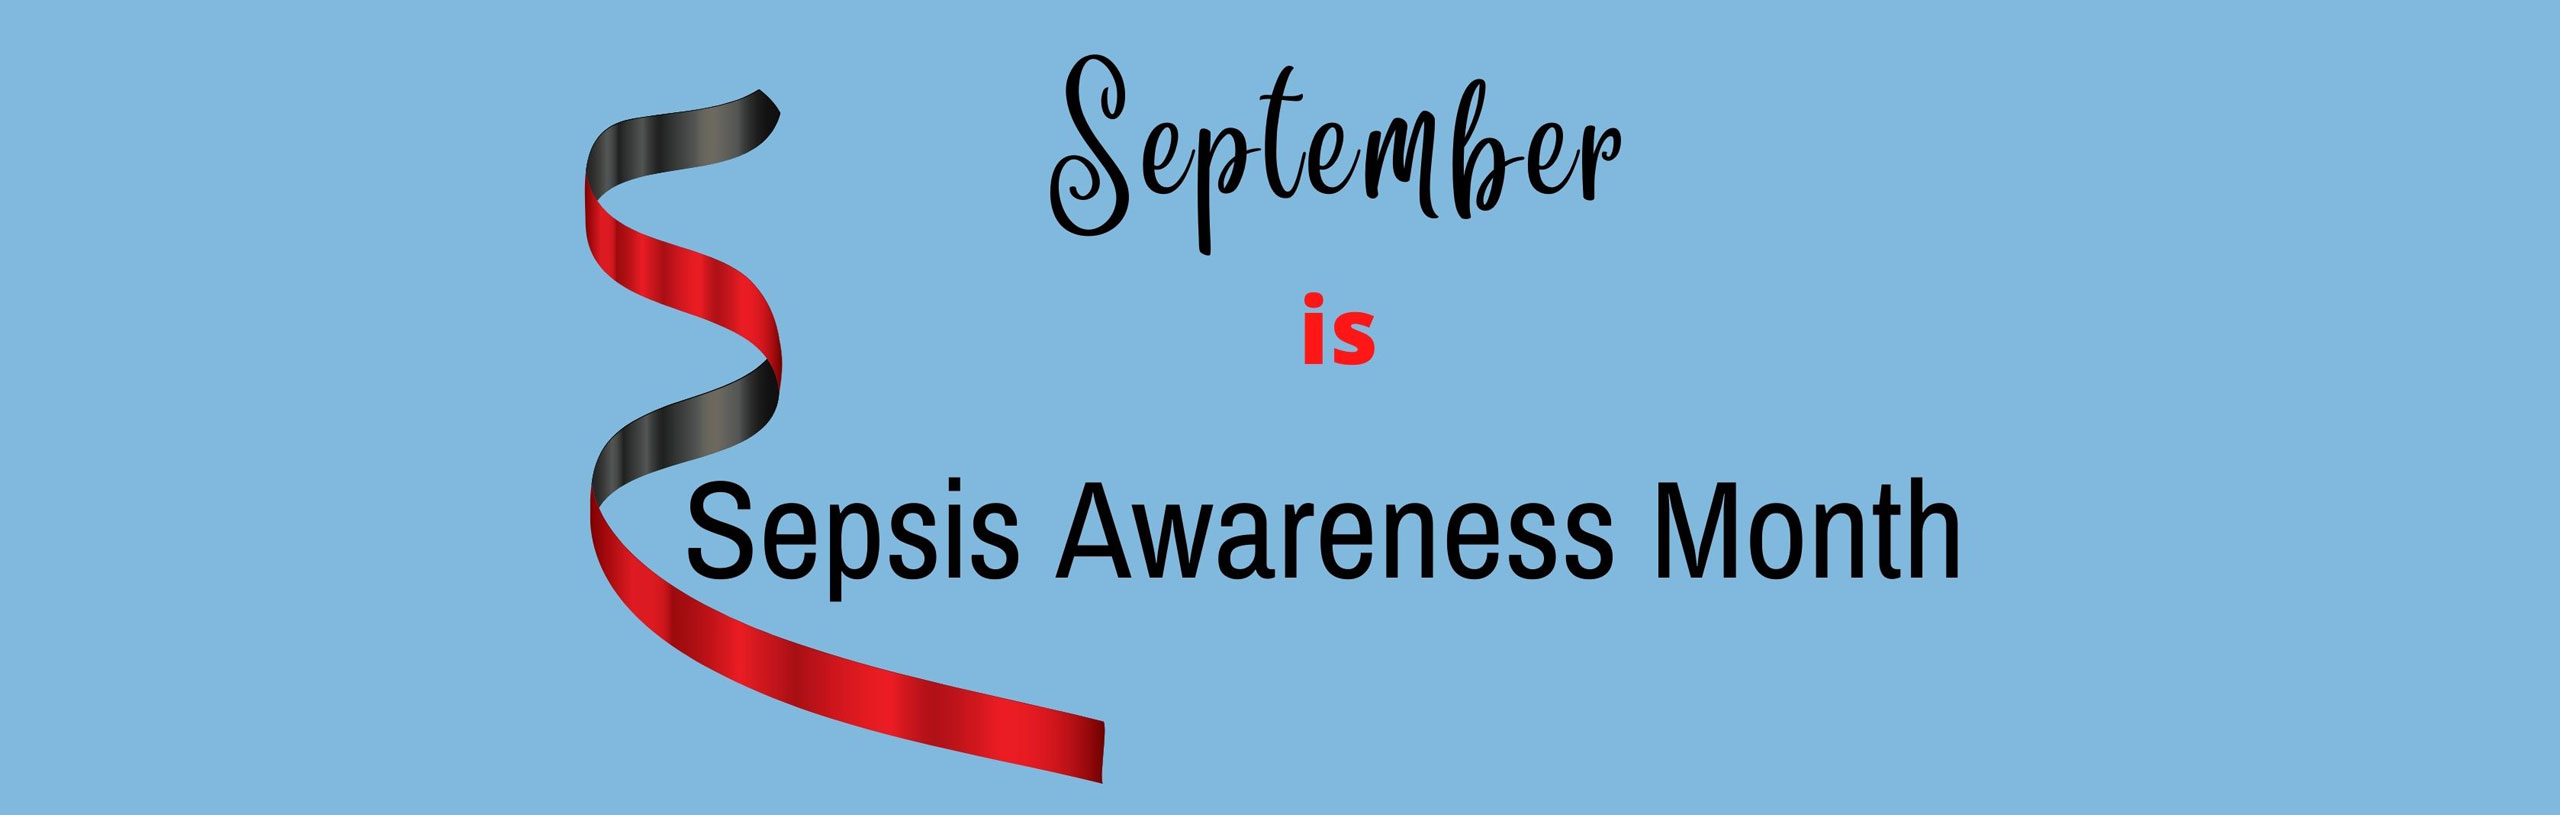 Banner that says:

September is Sepsis Awareness Month